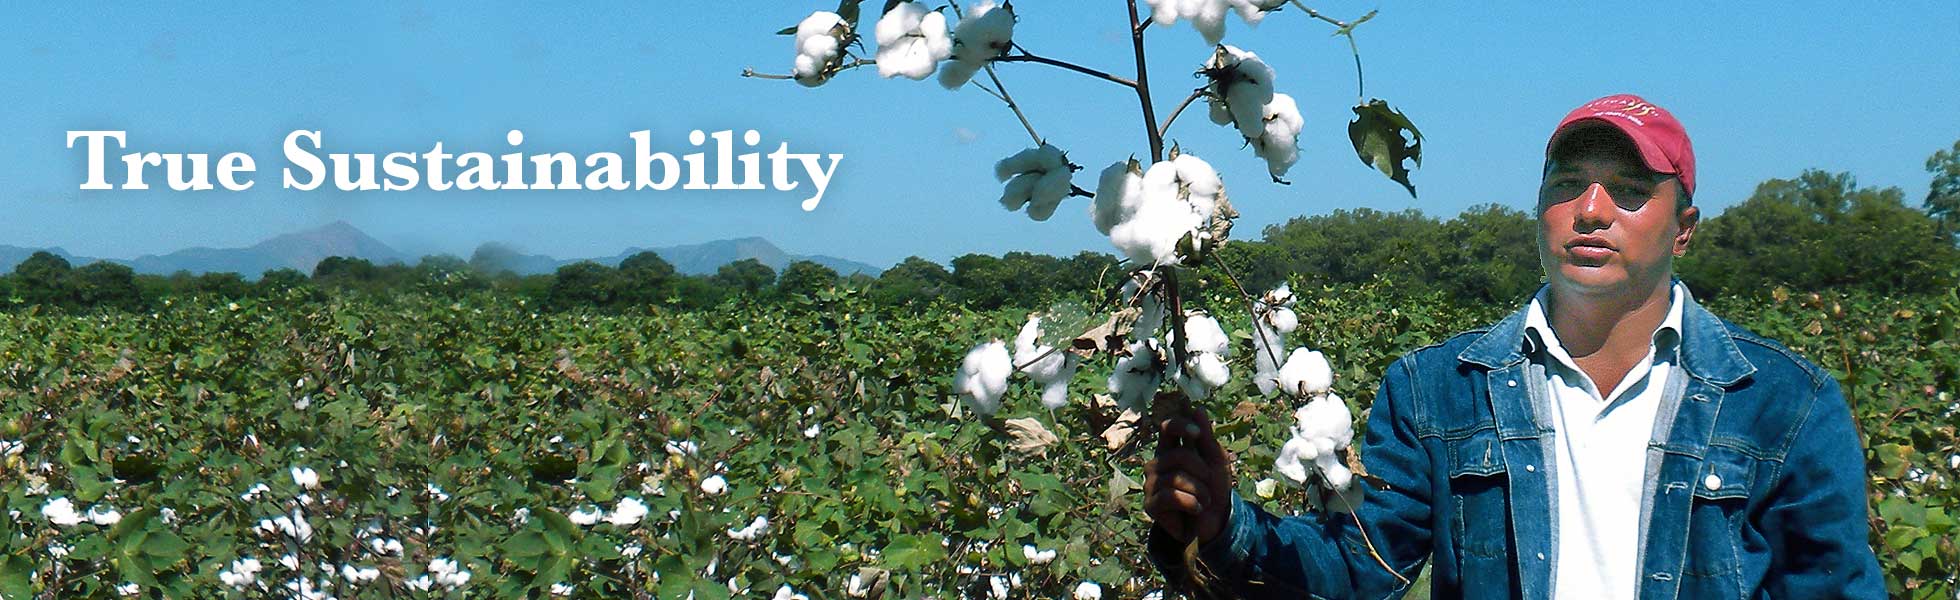 Person standing in a field of cotton holding up a branch of cotton. Text next to them reads: True Sustainability.